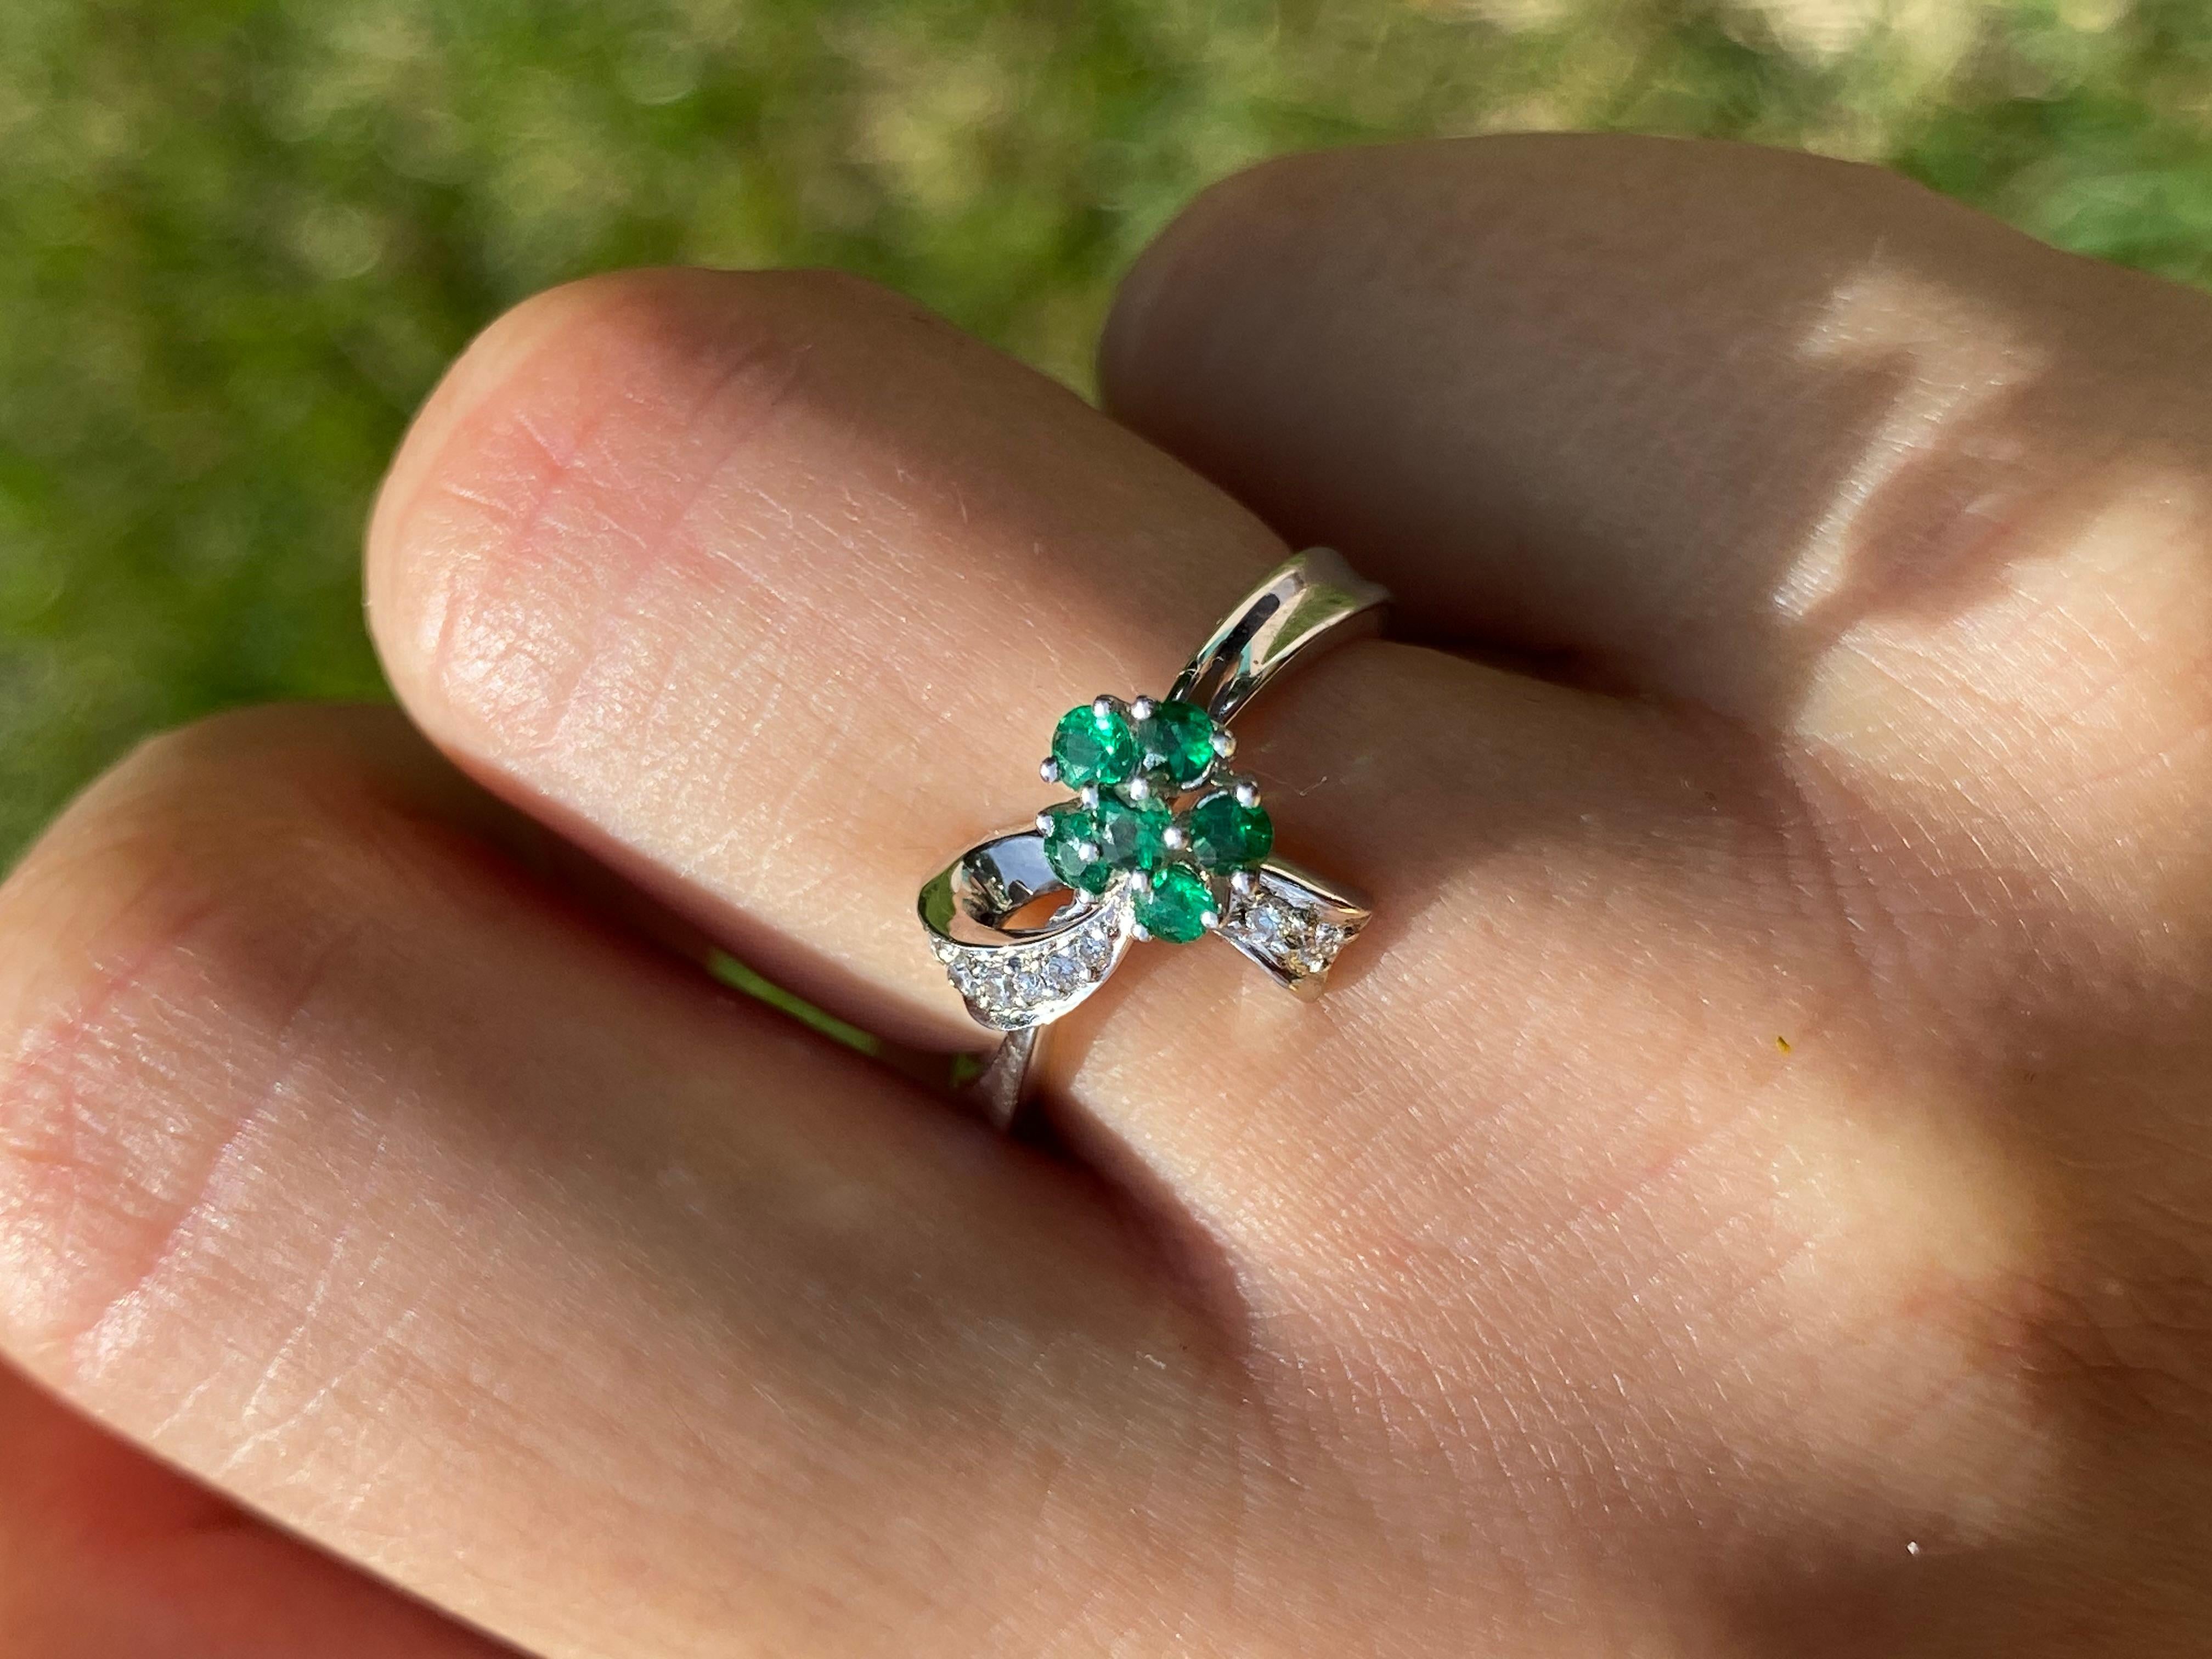 Centering six Round-Brilliant Cut Brazil Emeralds, accented by 0.07 Carats of Round-Brilliant Diamonds, and set in 14K White Gold, this dainty ring is designed into a classic 